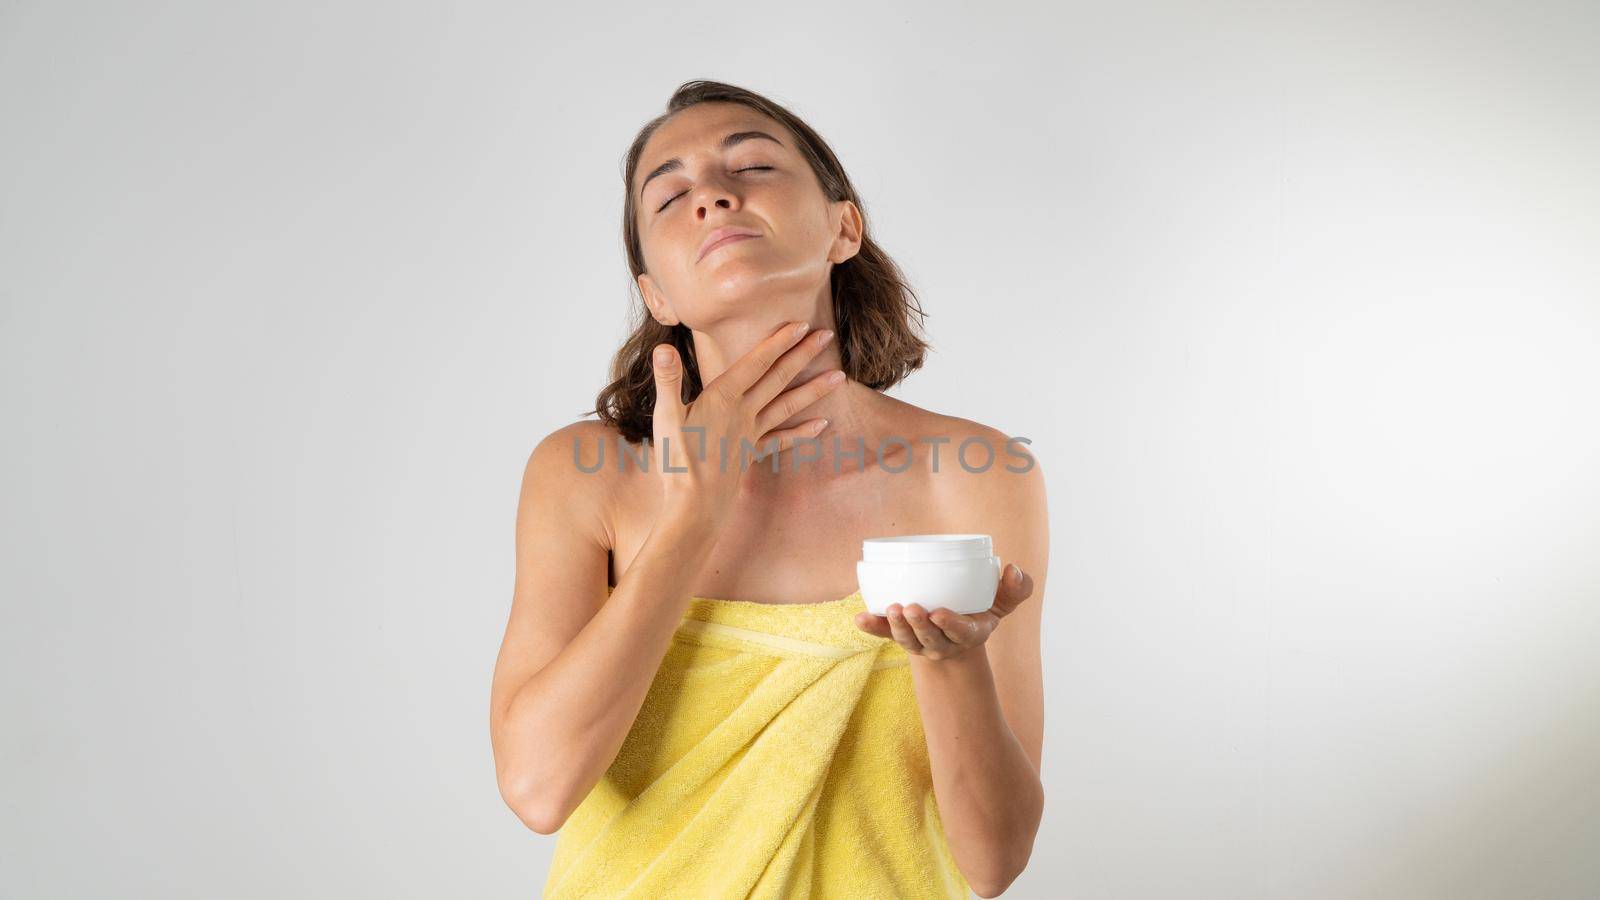 A woman applies cream to the neck - home care. High quality photo